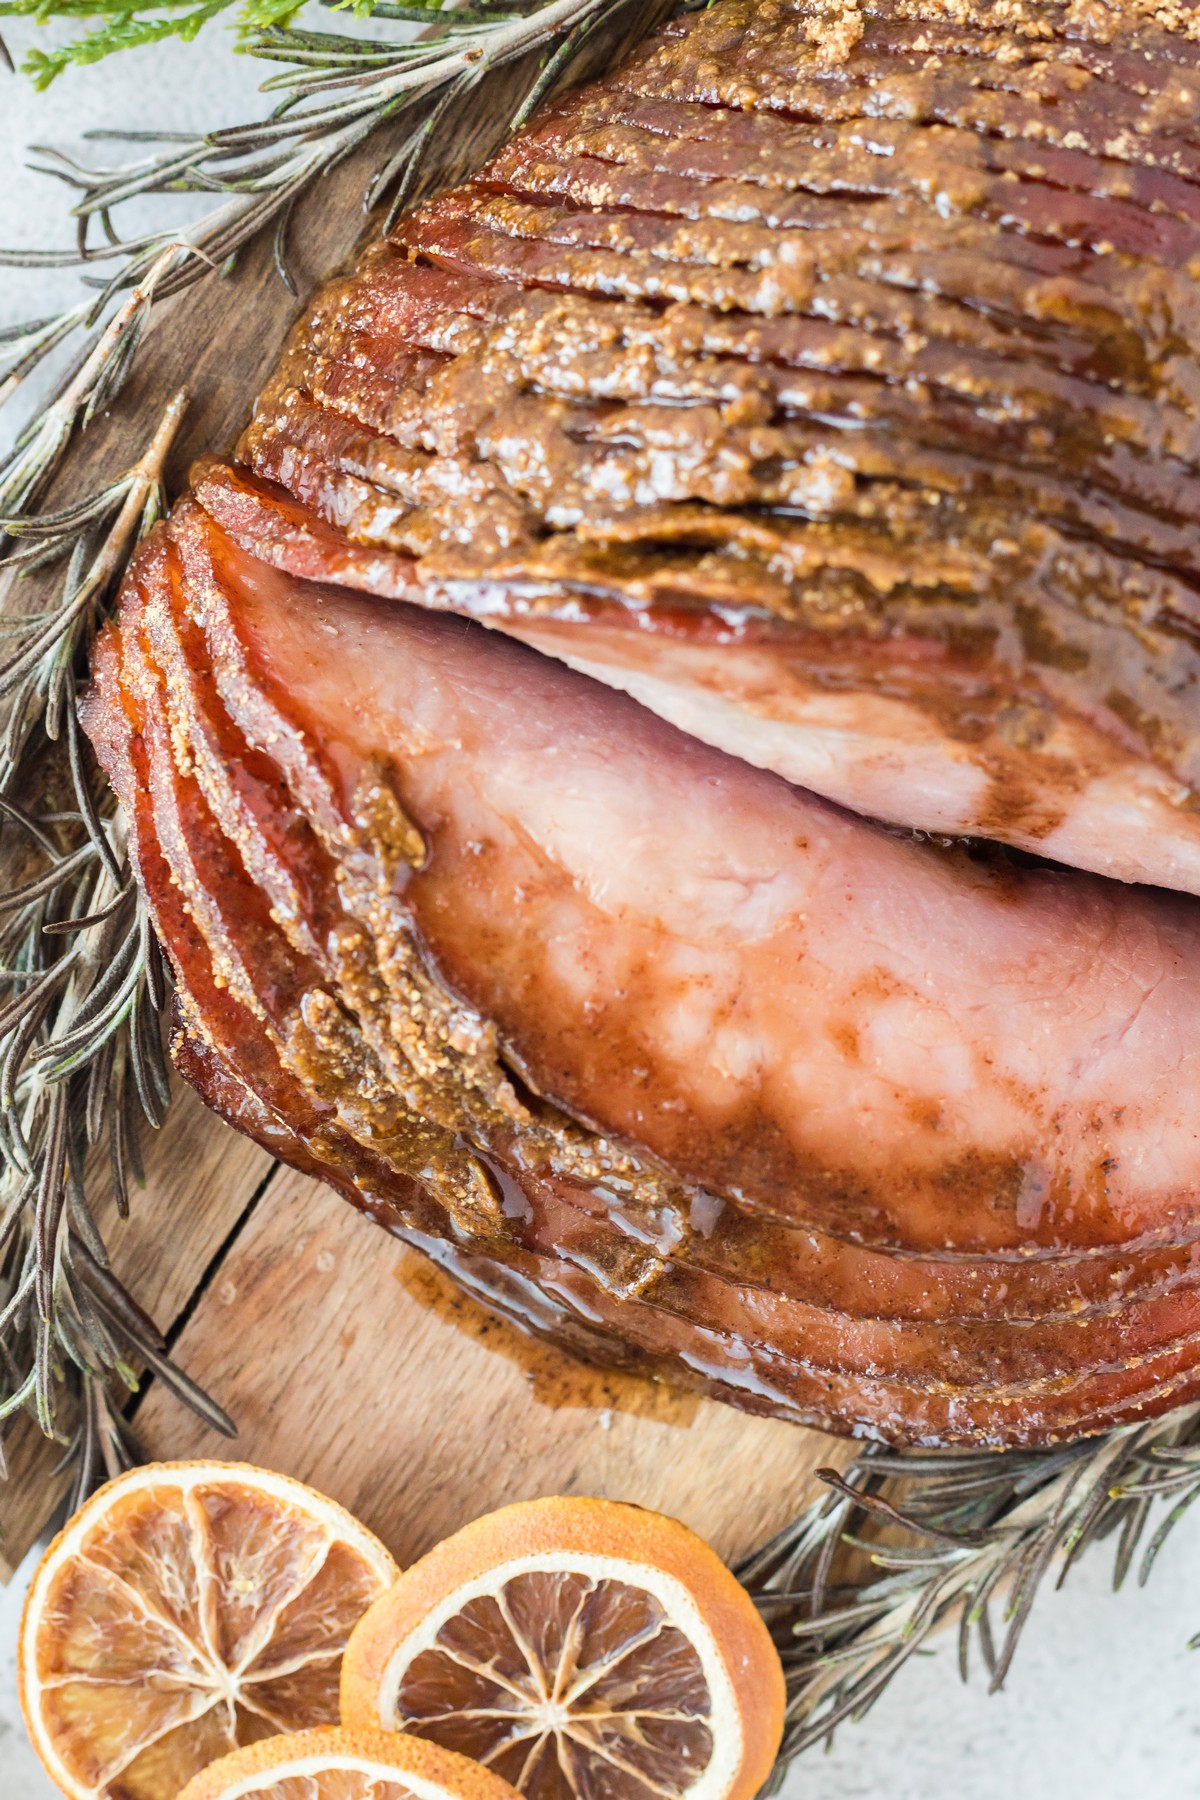 How To Cook A Spiral Ham